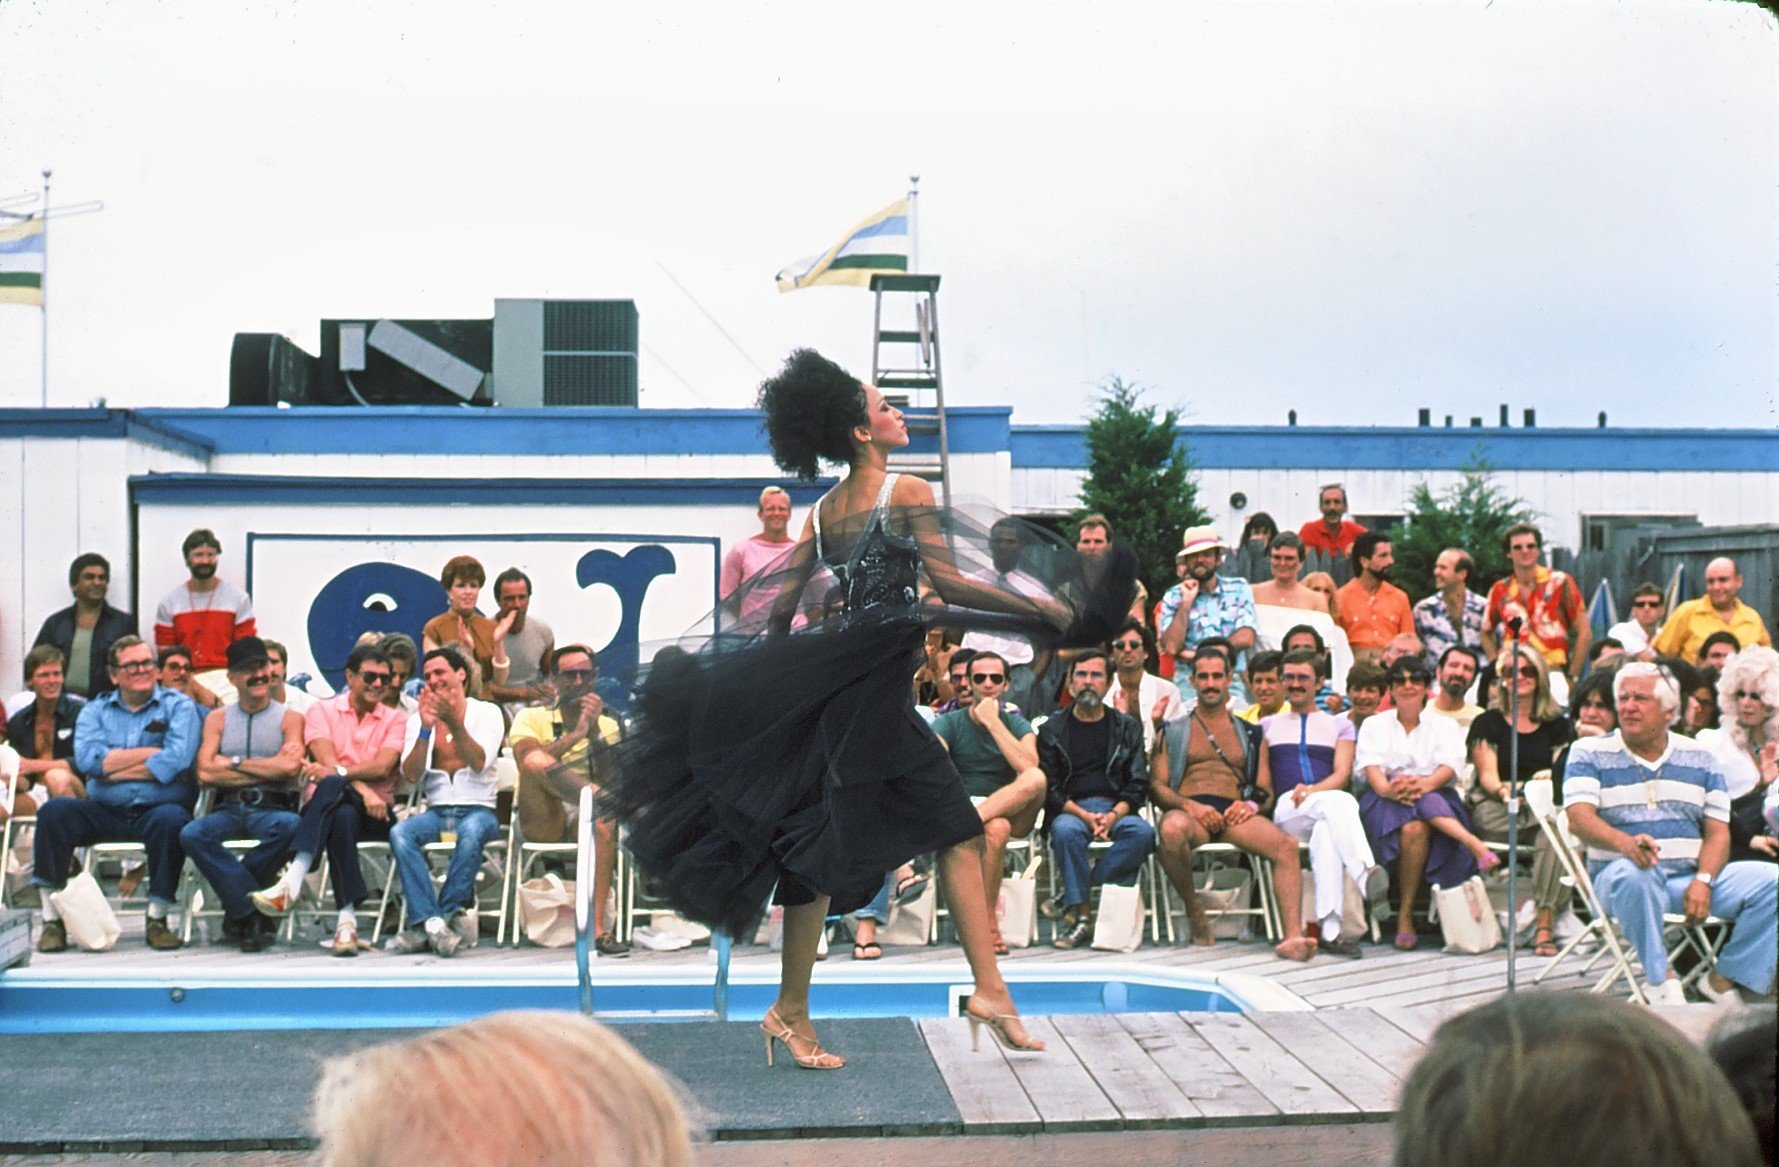 Pat Cleveland model at Pines Fashion show 1981.jpg